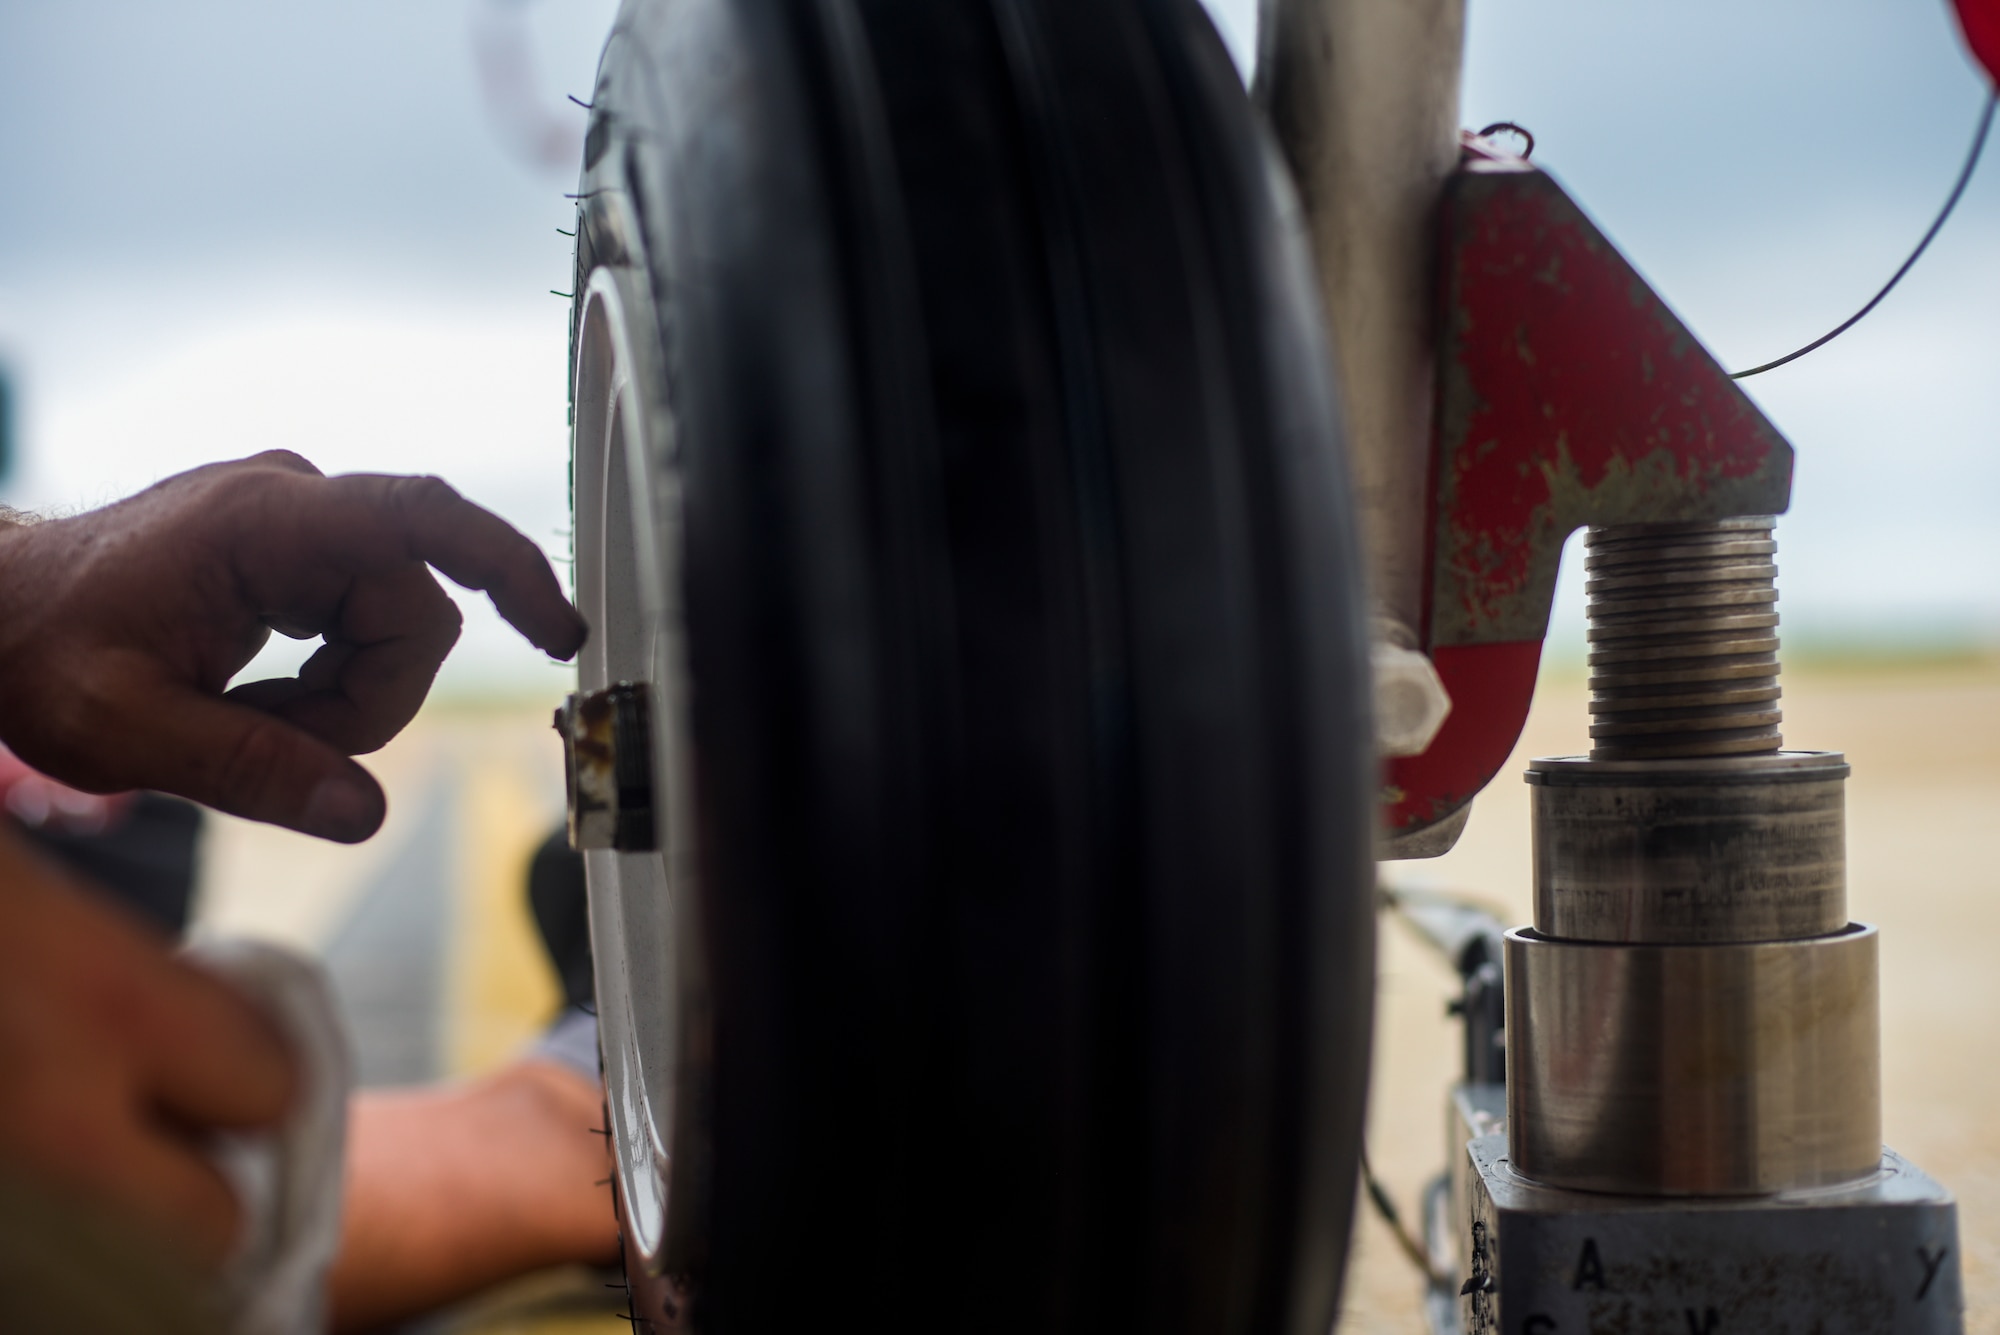 Michael Reeves with the 82nd Aerial Targets Squadron, contractor, places a grease-based lubricant on the front landing gear of a QF-16 at Tyndall Air Force Base, Florida, July 9, 2020. The 82nd ARTS contractors fulfill a variety of different flight line technical skills, including replacing old or malfunctioning landing gear. (U.S. Air Force photo by Staff Sgt. Magen M. Reeves)